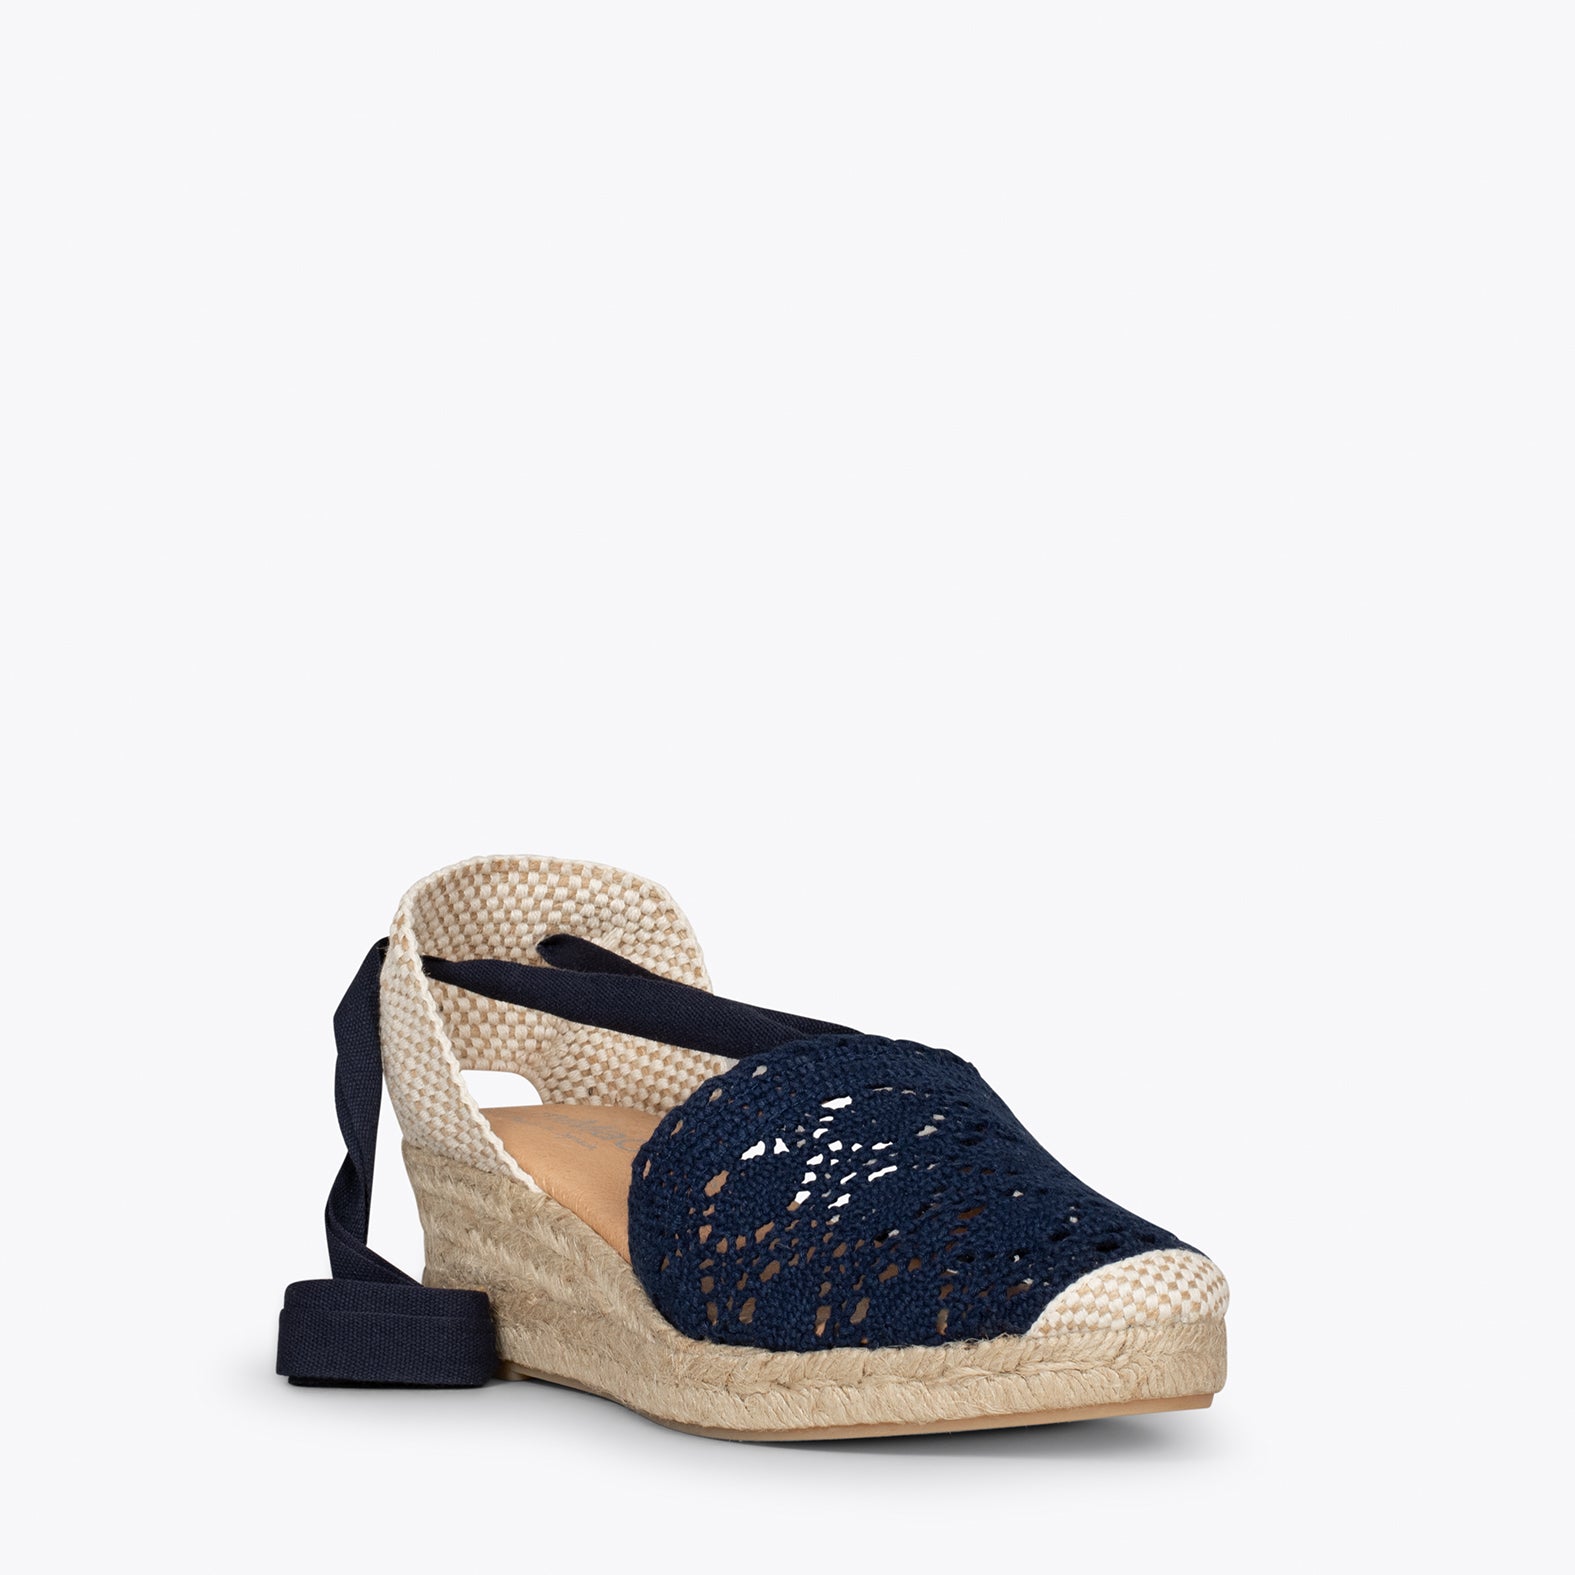 DEIÀ – NAVY crocheted espadrilles with laces